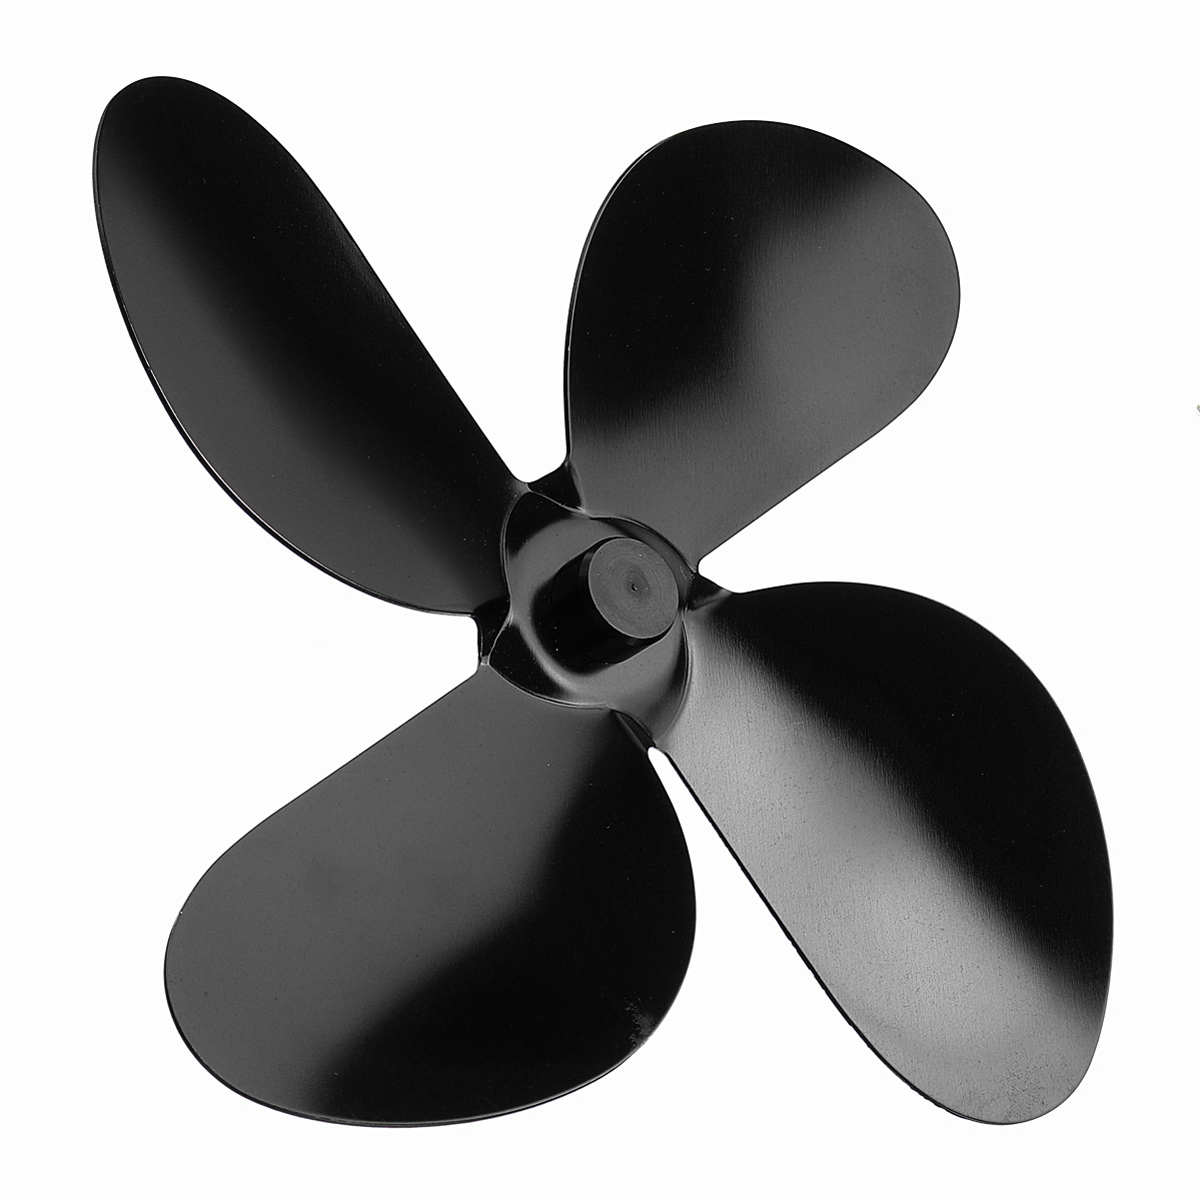 Find 4 Fireplace Fan Blades For Thermal Fire Heater Power Wood Stove Fan Household Eco for Sale on Gipsybee.com with cryptocurrencies